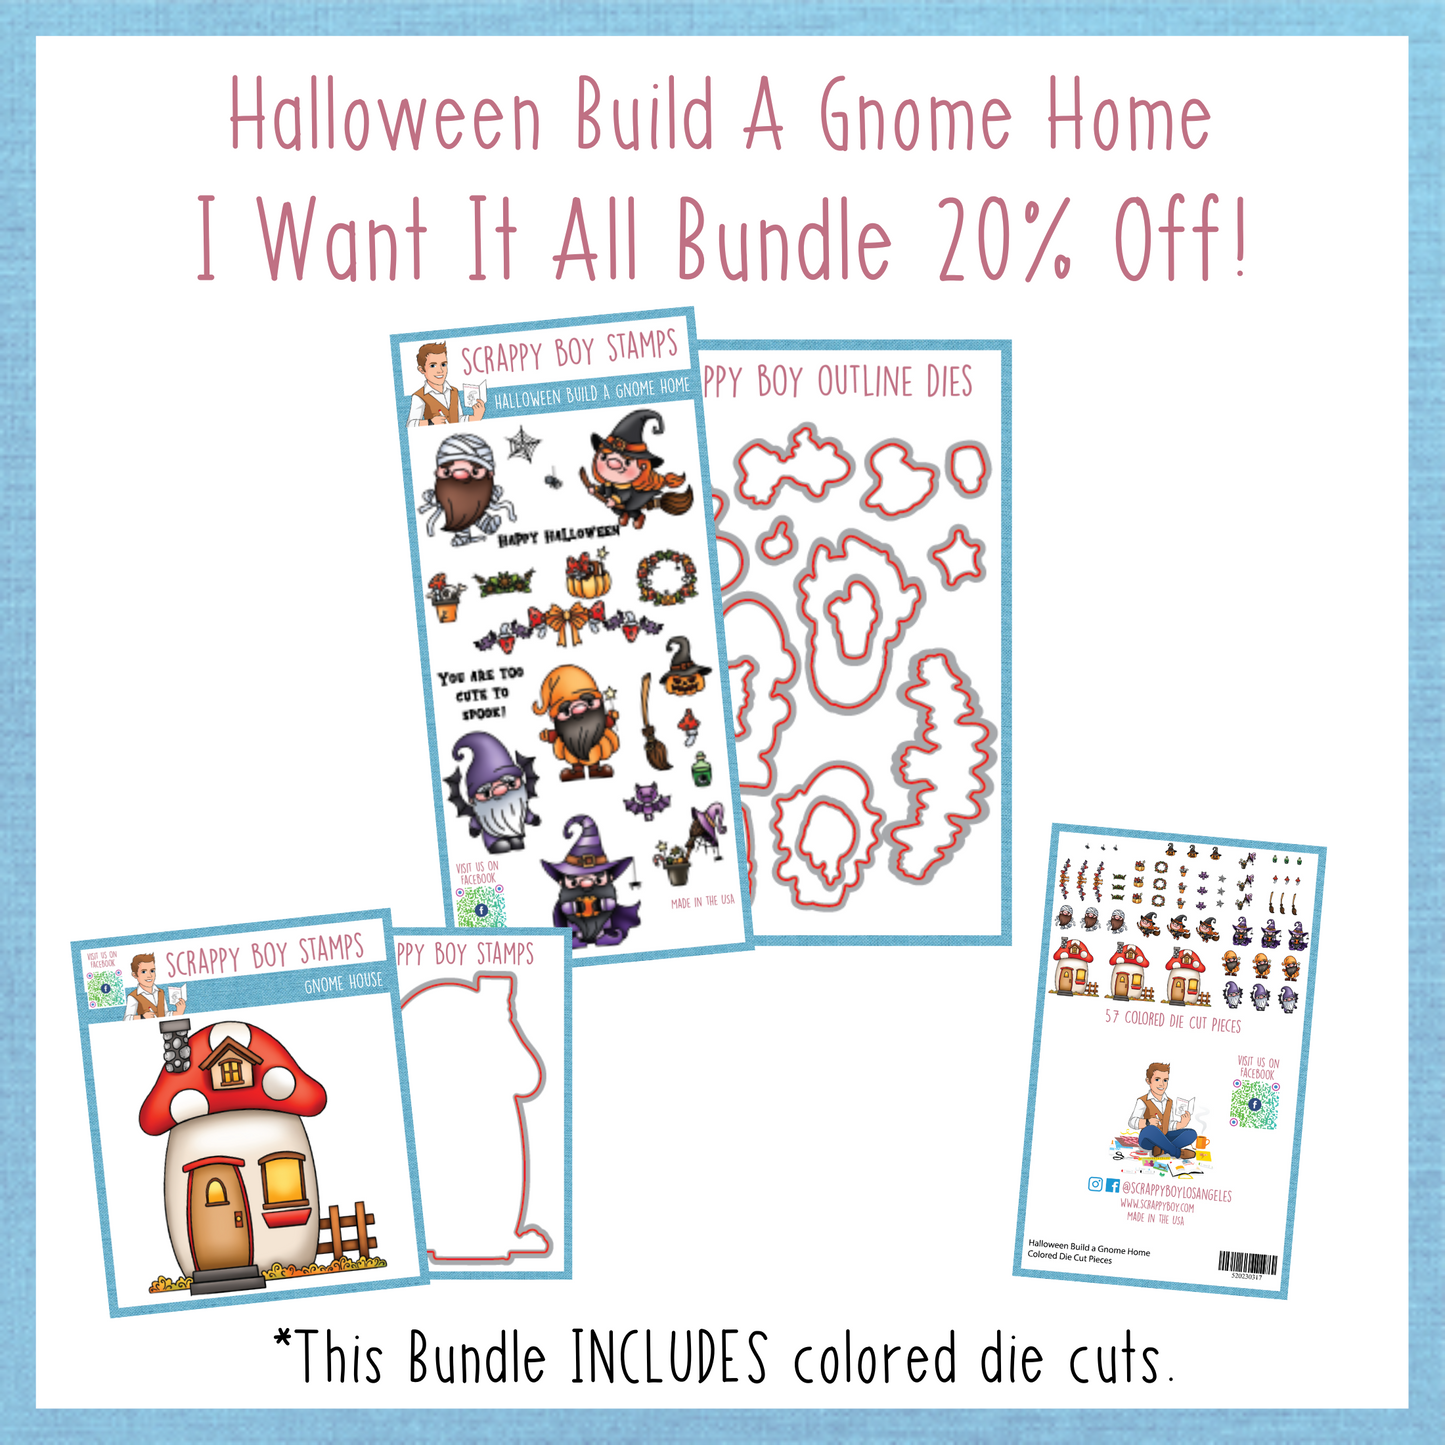 I Want It All Bundle - Halloween Build A Gnome Home Release Scrappy Boy Stamps